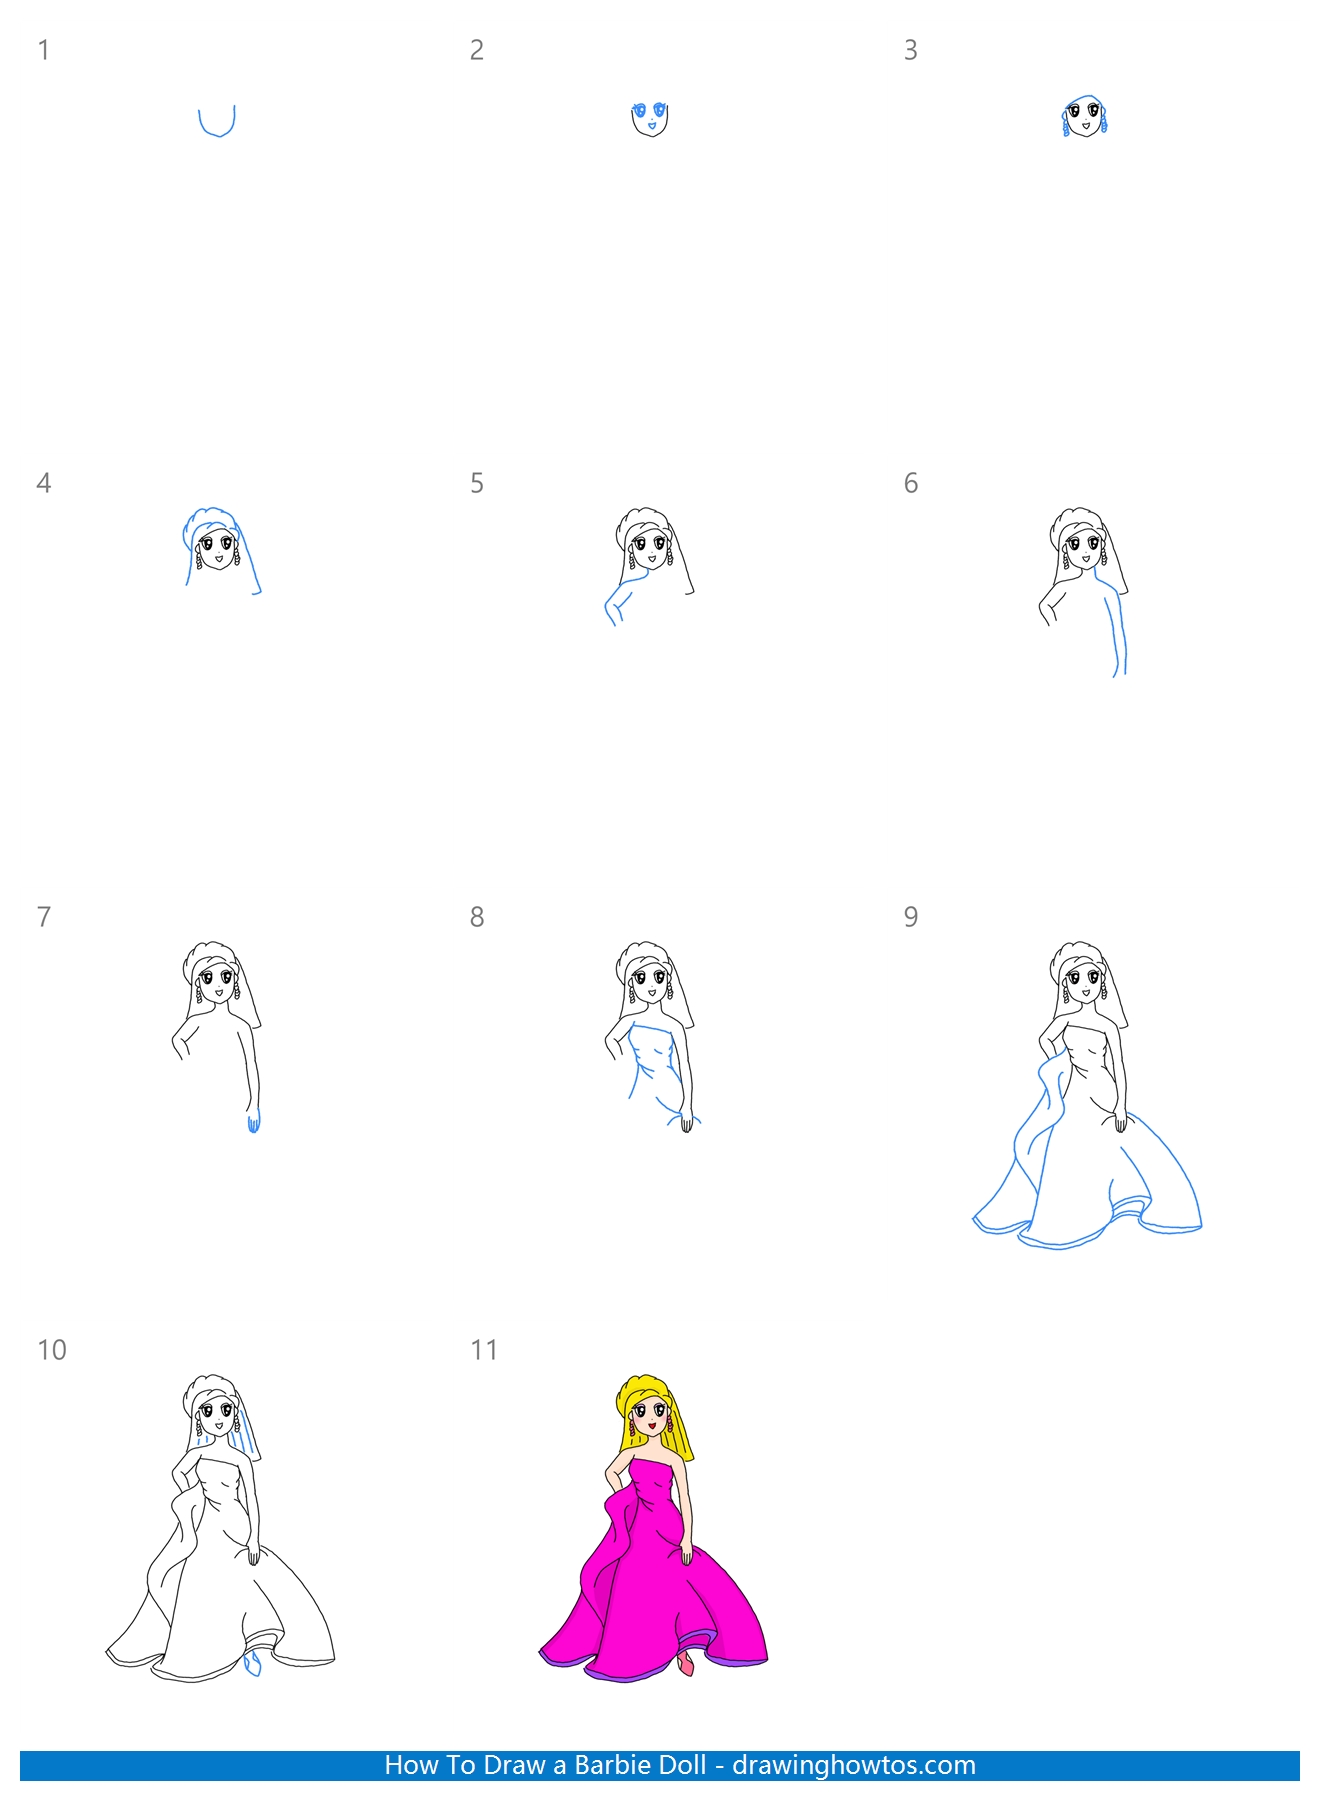 How to Draw a Barbie Doll Step by Step